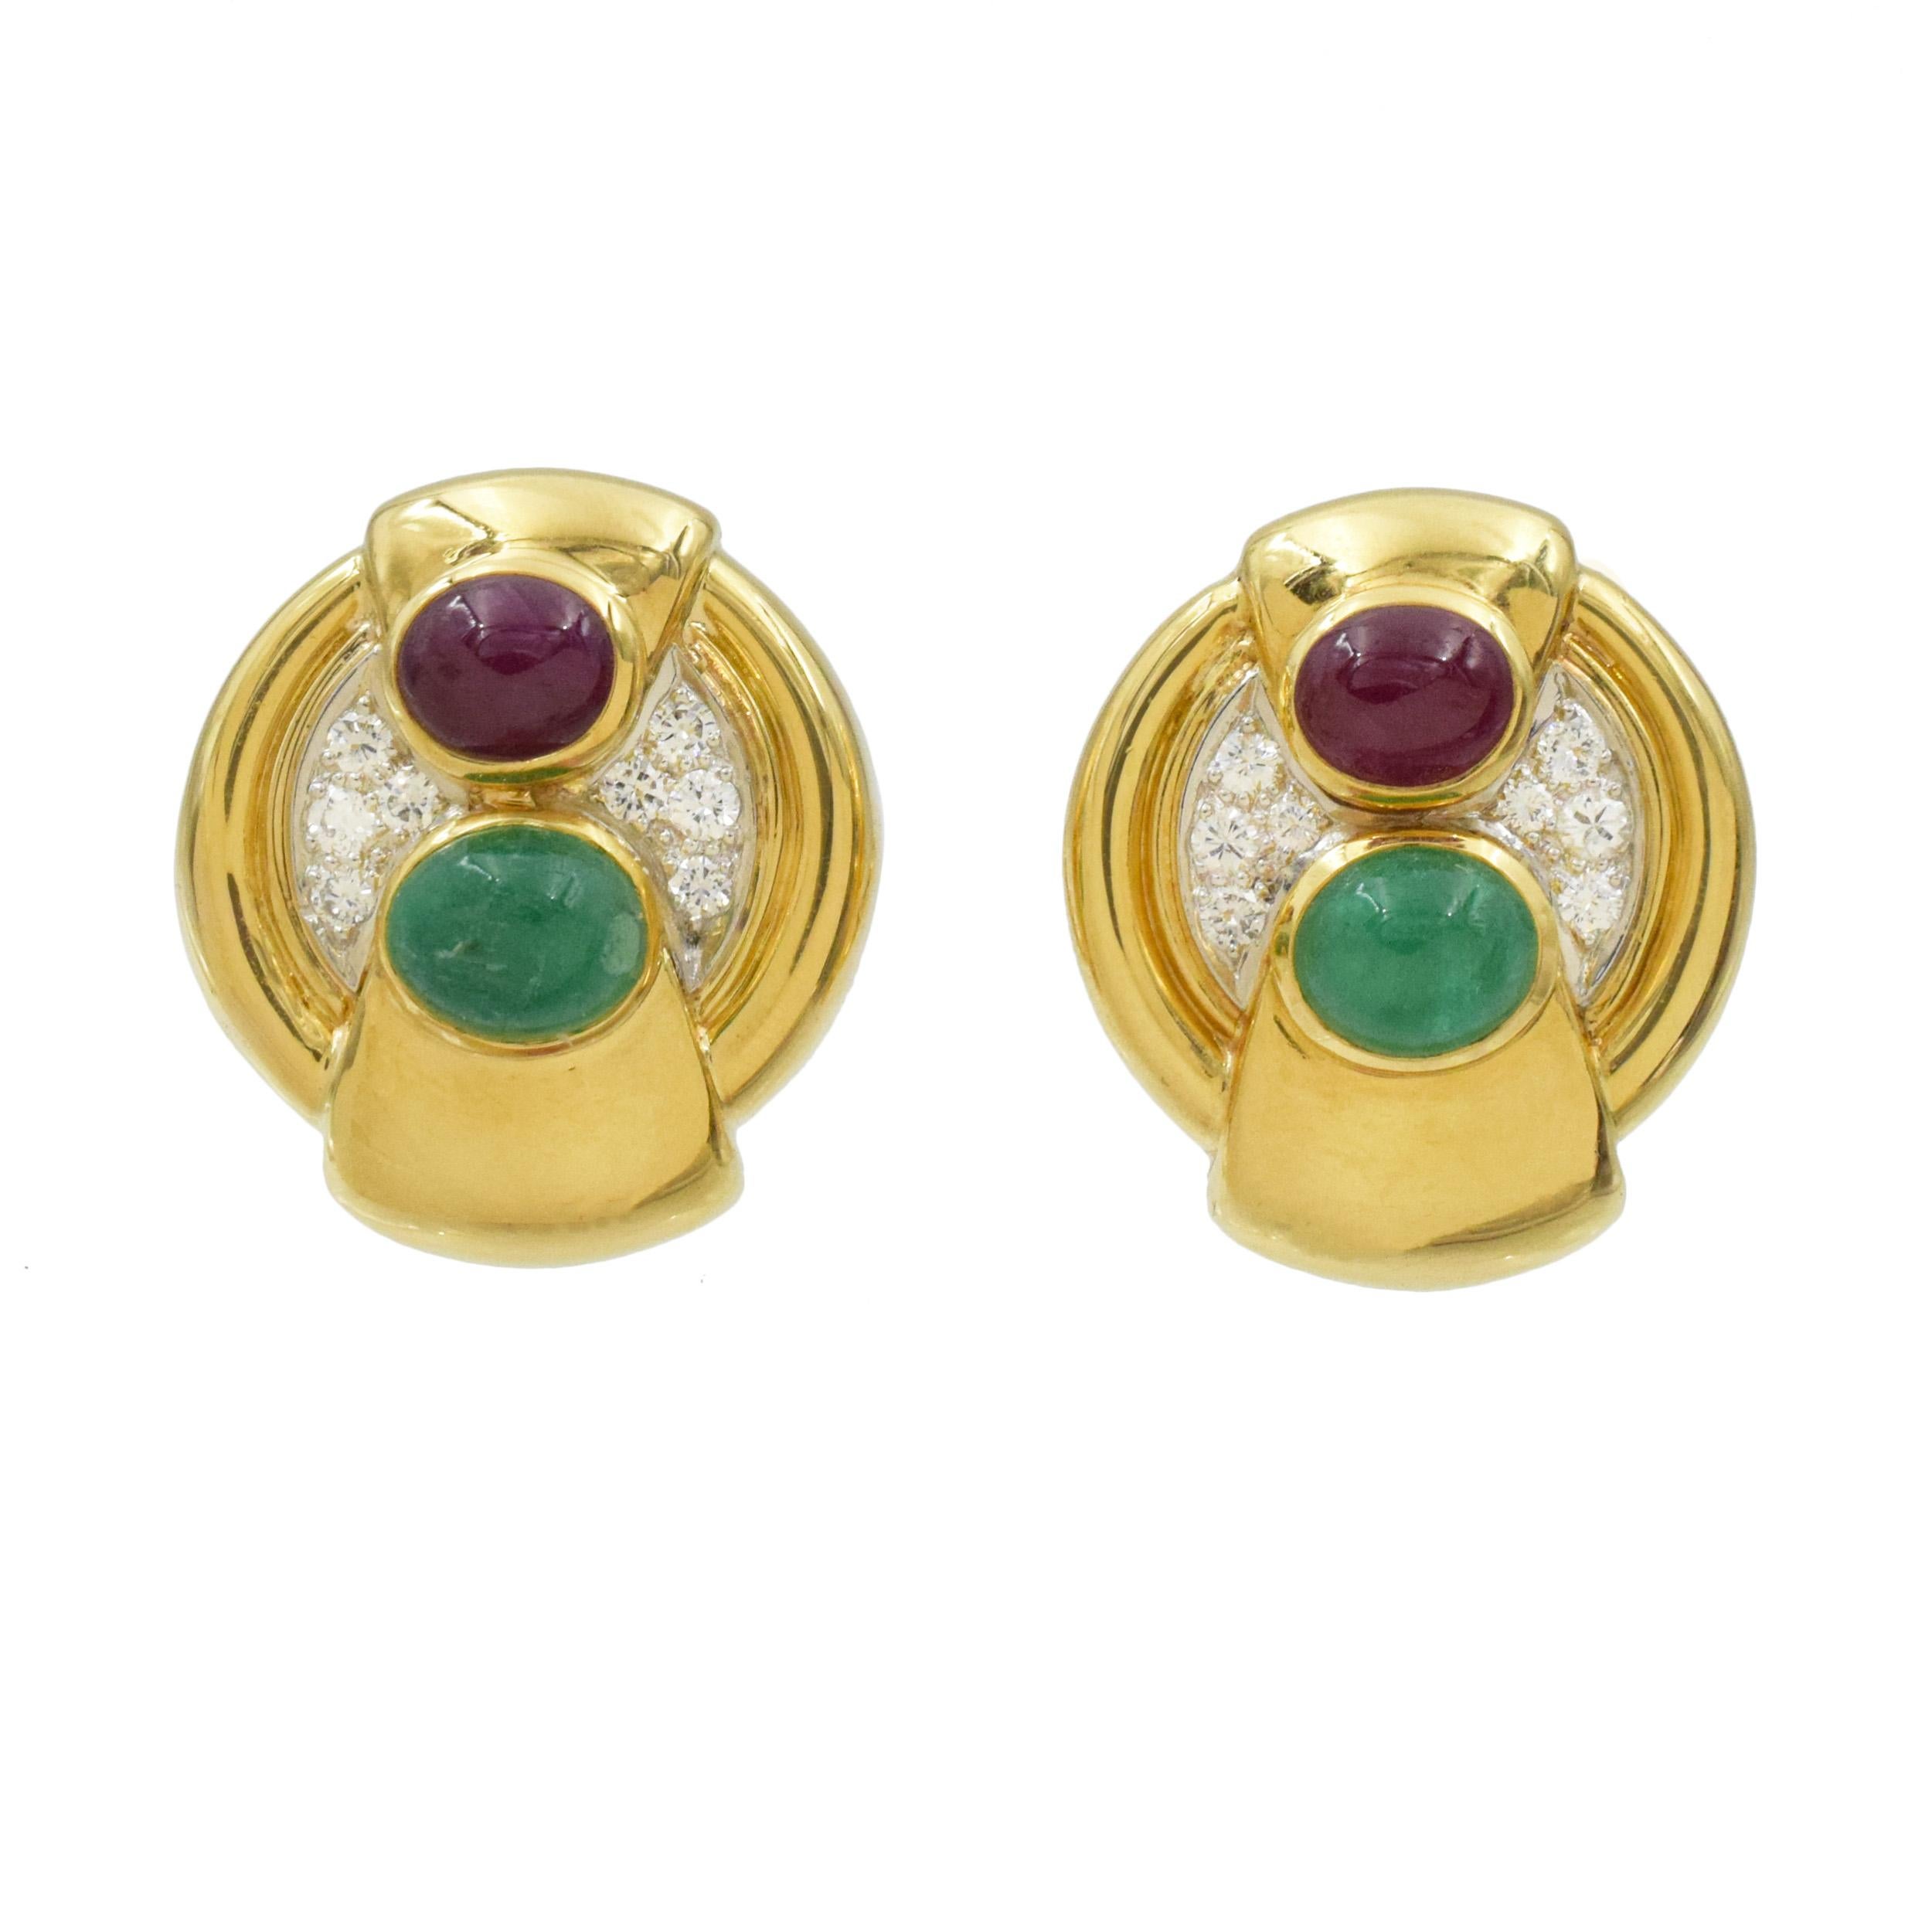 David Webb Gemstone and Diamond Earrings This pair of earrings has 2 cabochon
rubies (2.5 carats total carat weight) and 2 cabochon emeralds (3 carats total carat weight) bezel set in 18k yellow gold along with 16 round diamonds (0.16 carats total